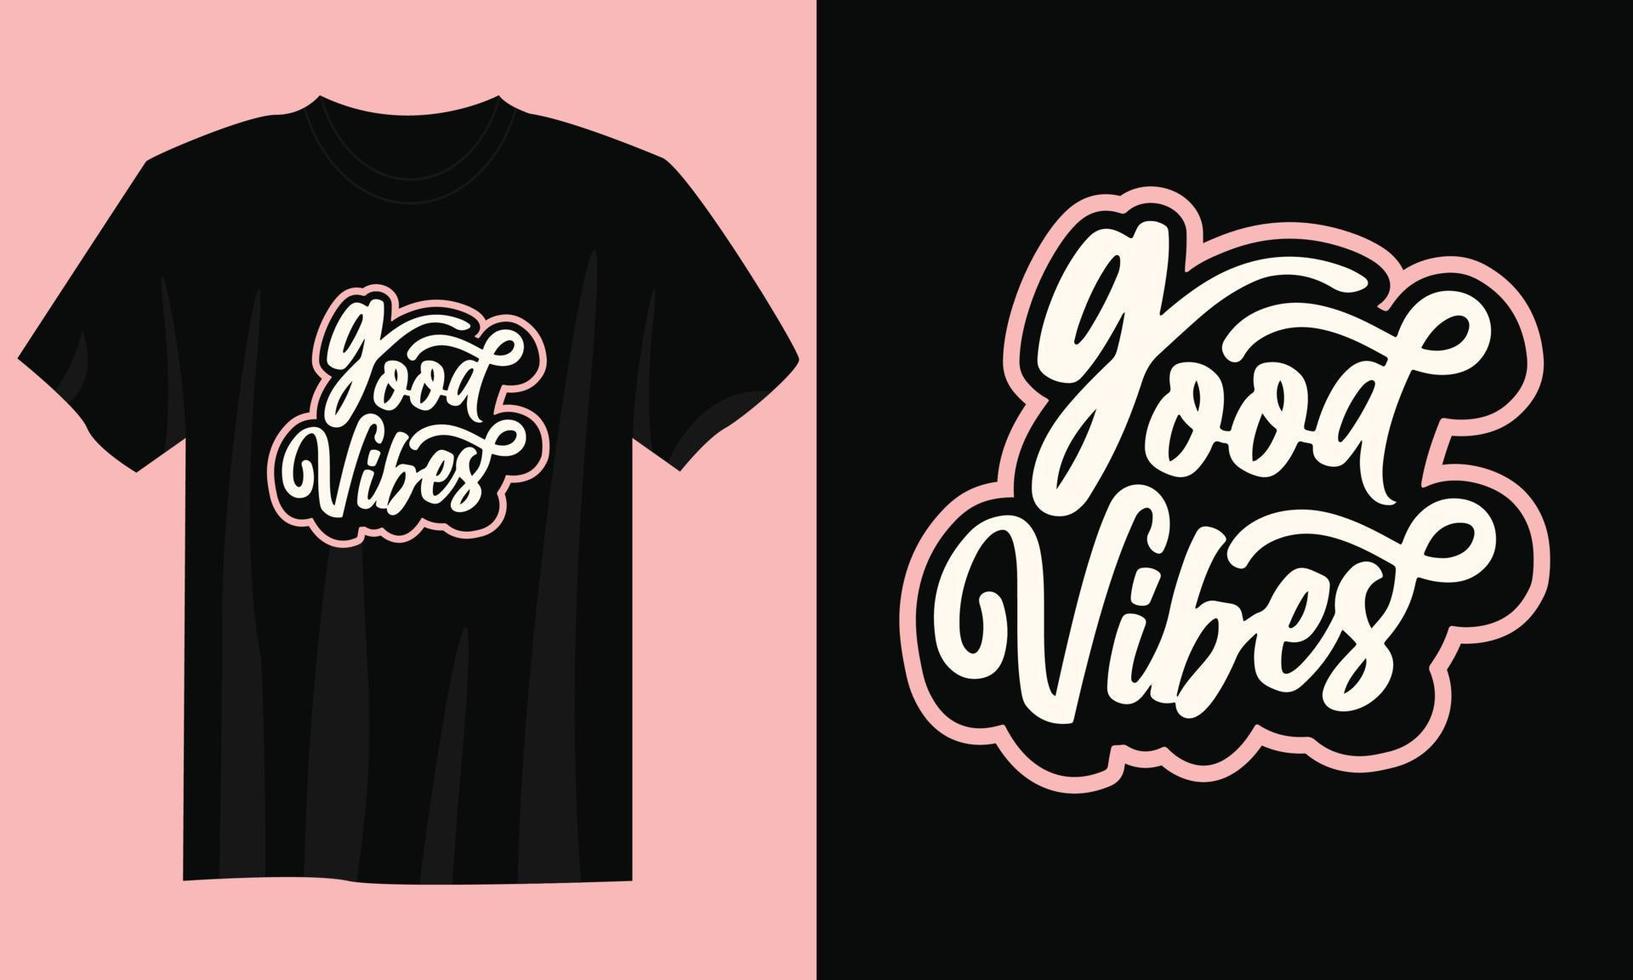 good vibes Typography Quote T-Shirt Design Vector